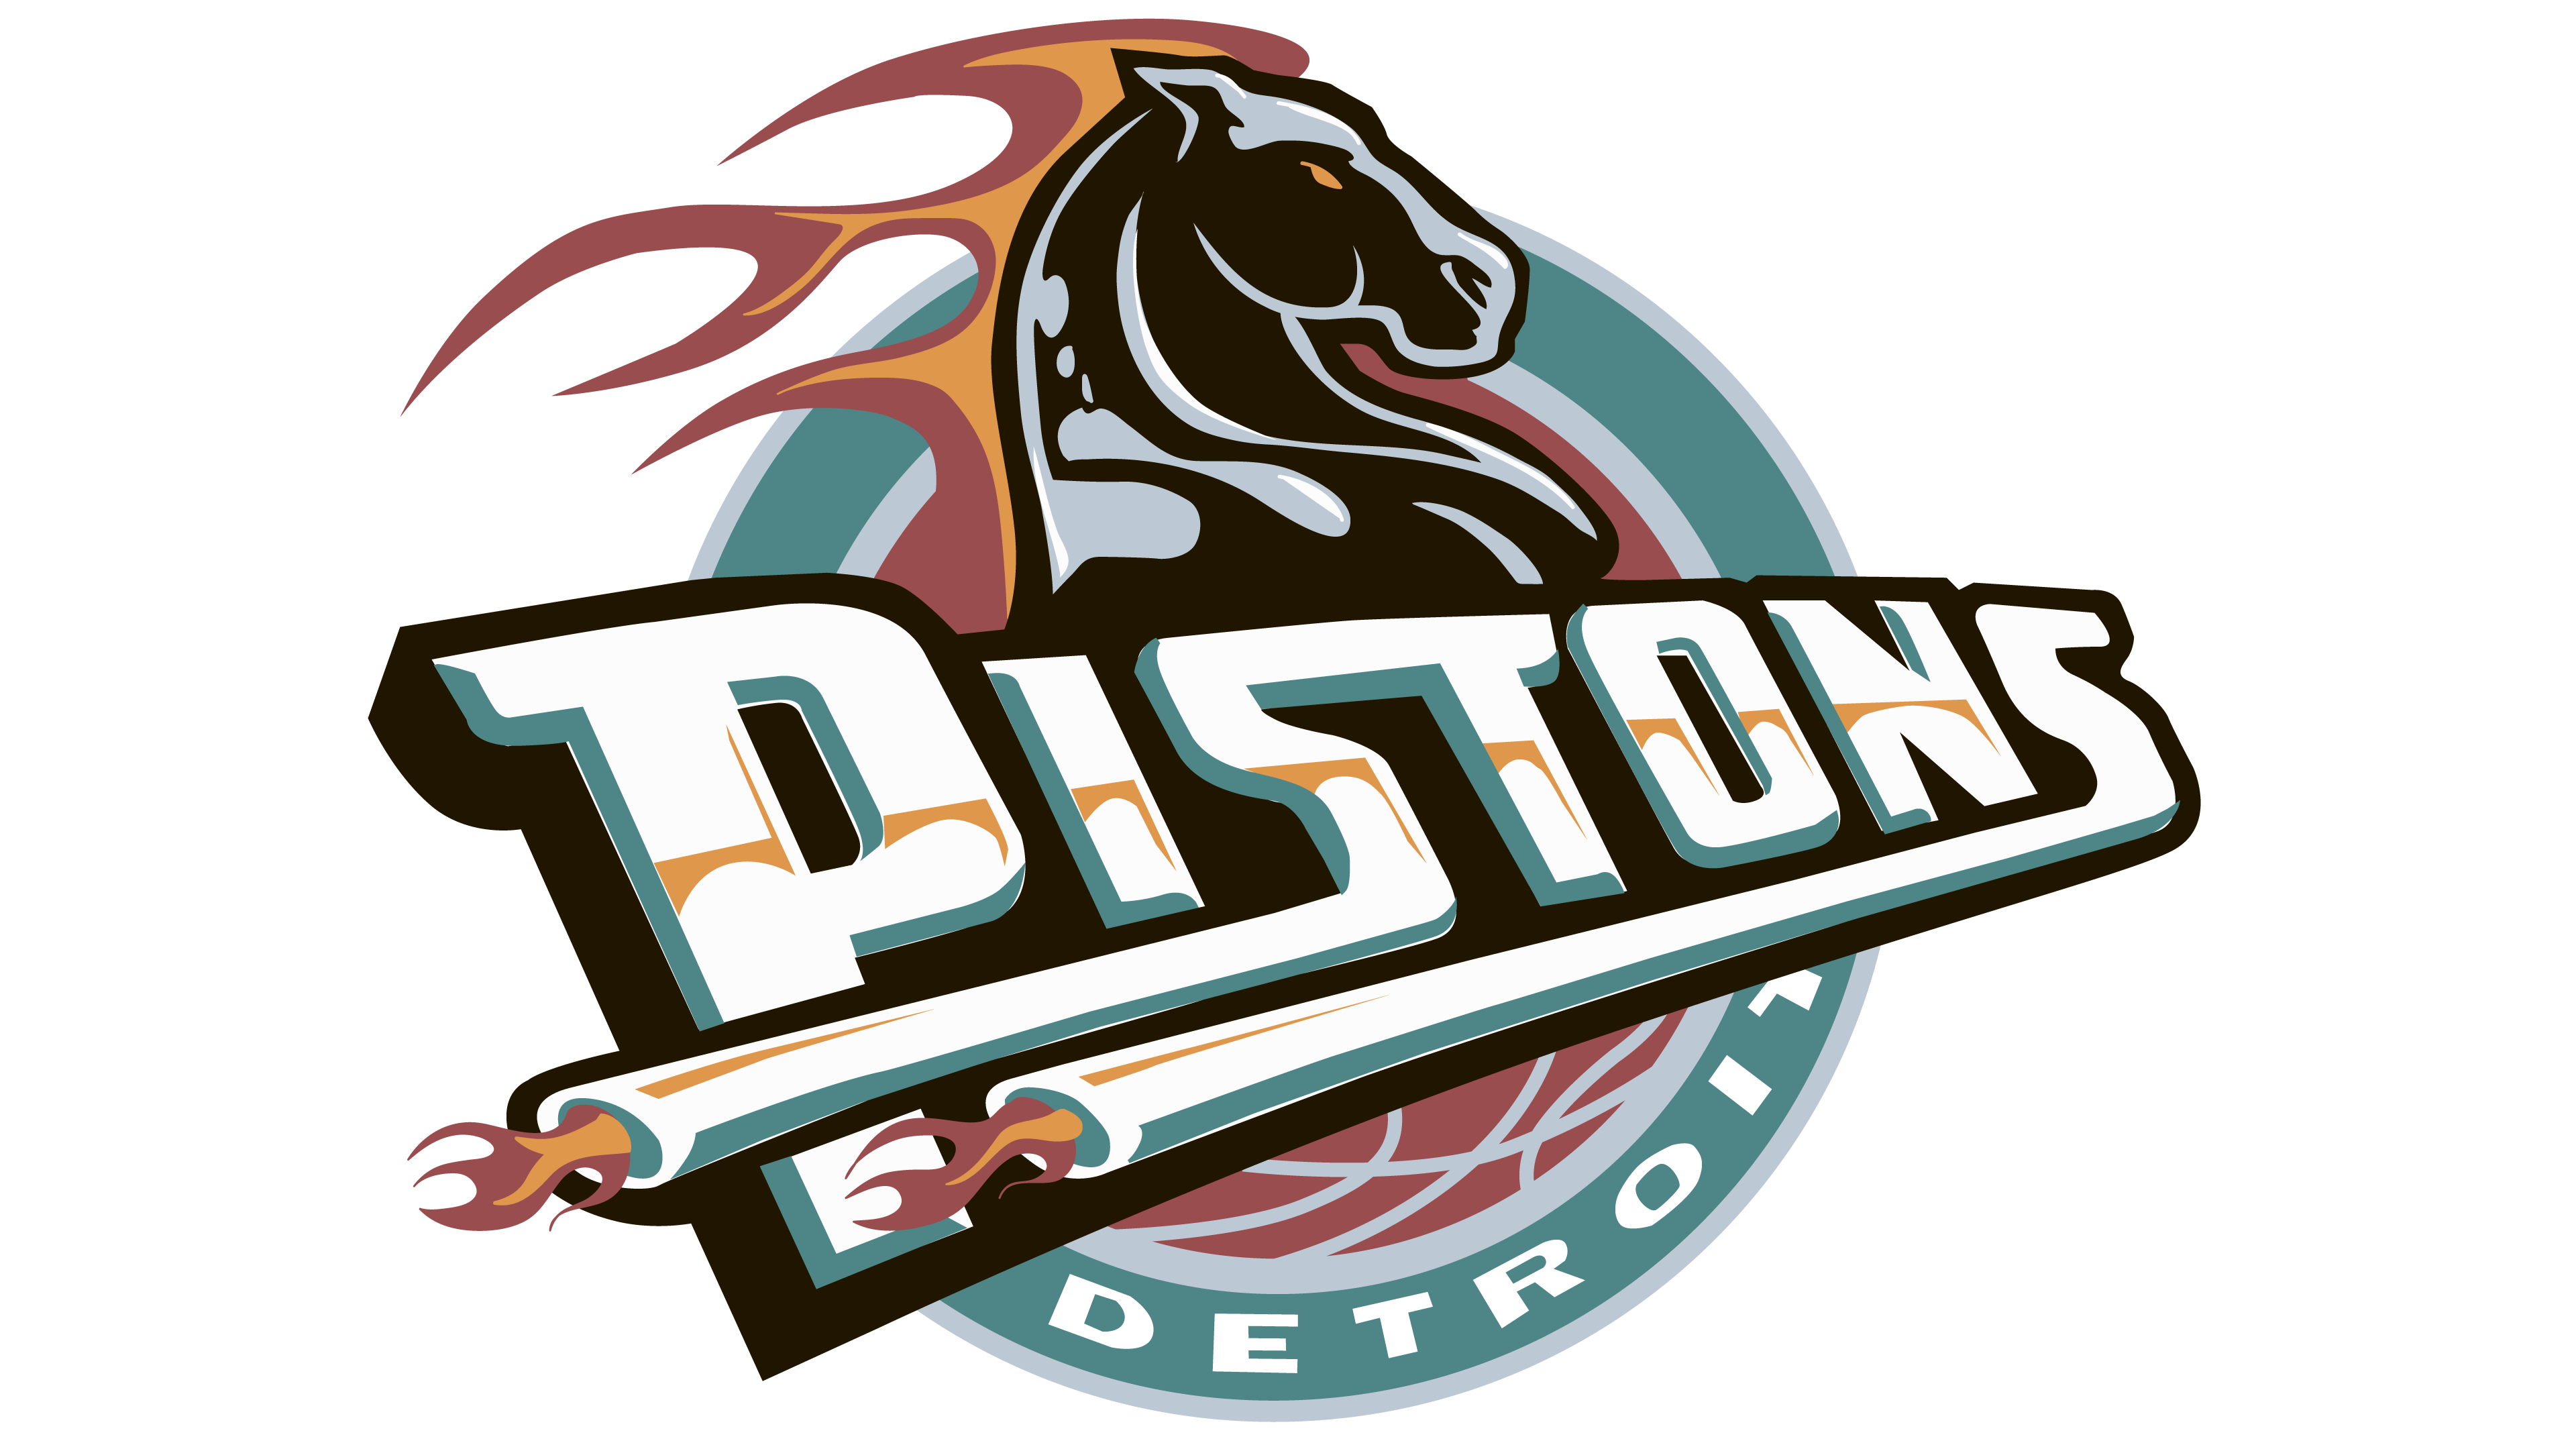 Pistons Logo - Detroit Pistons logo History of the Team Name and emblem